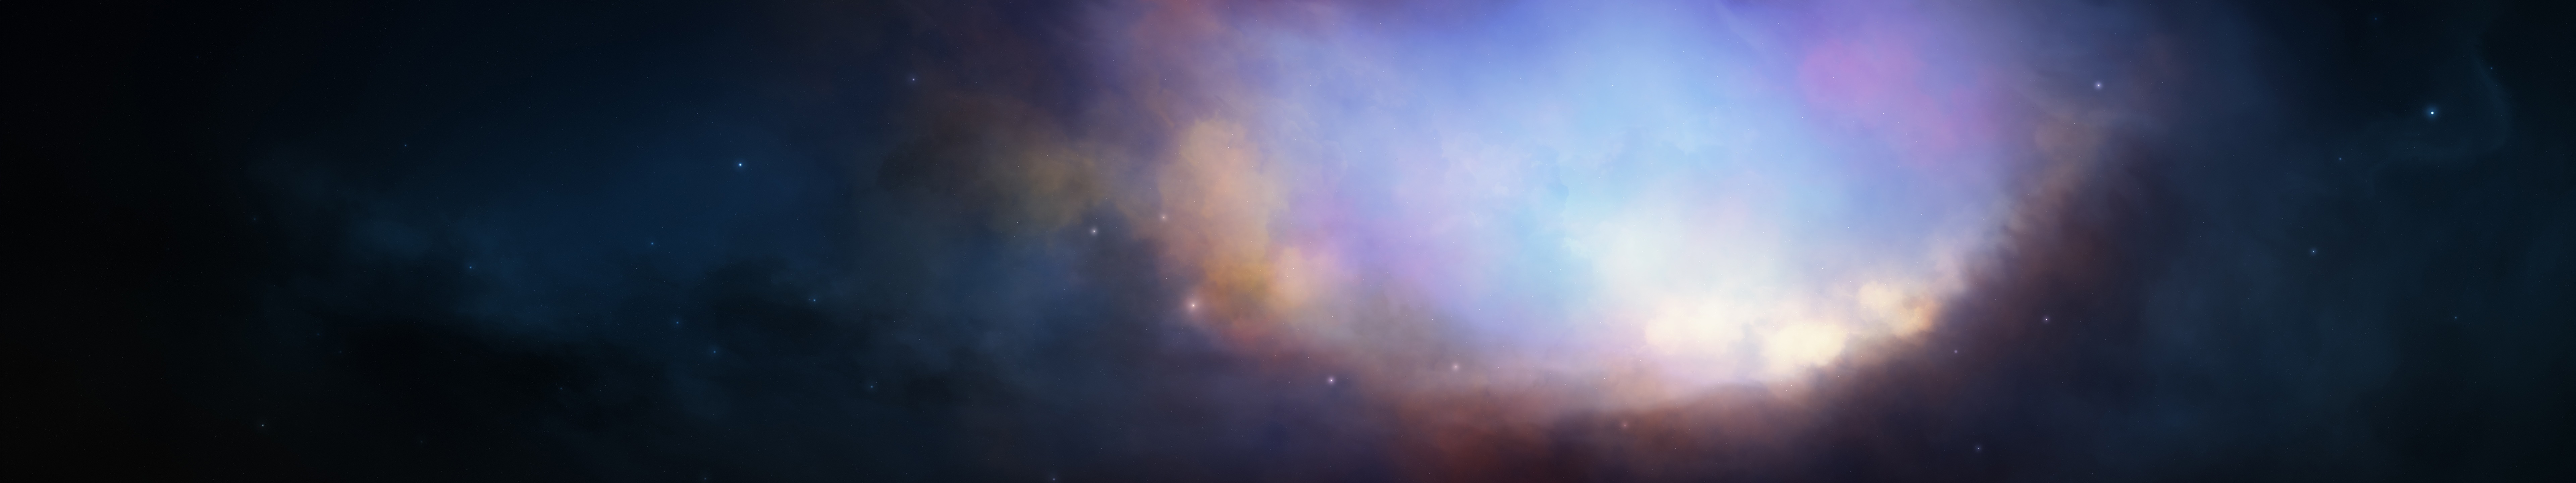 our galaxy laptop wallpaper